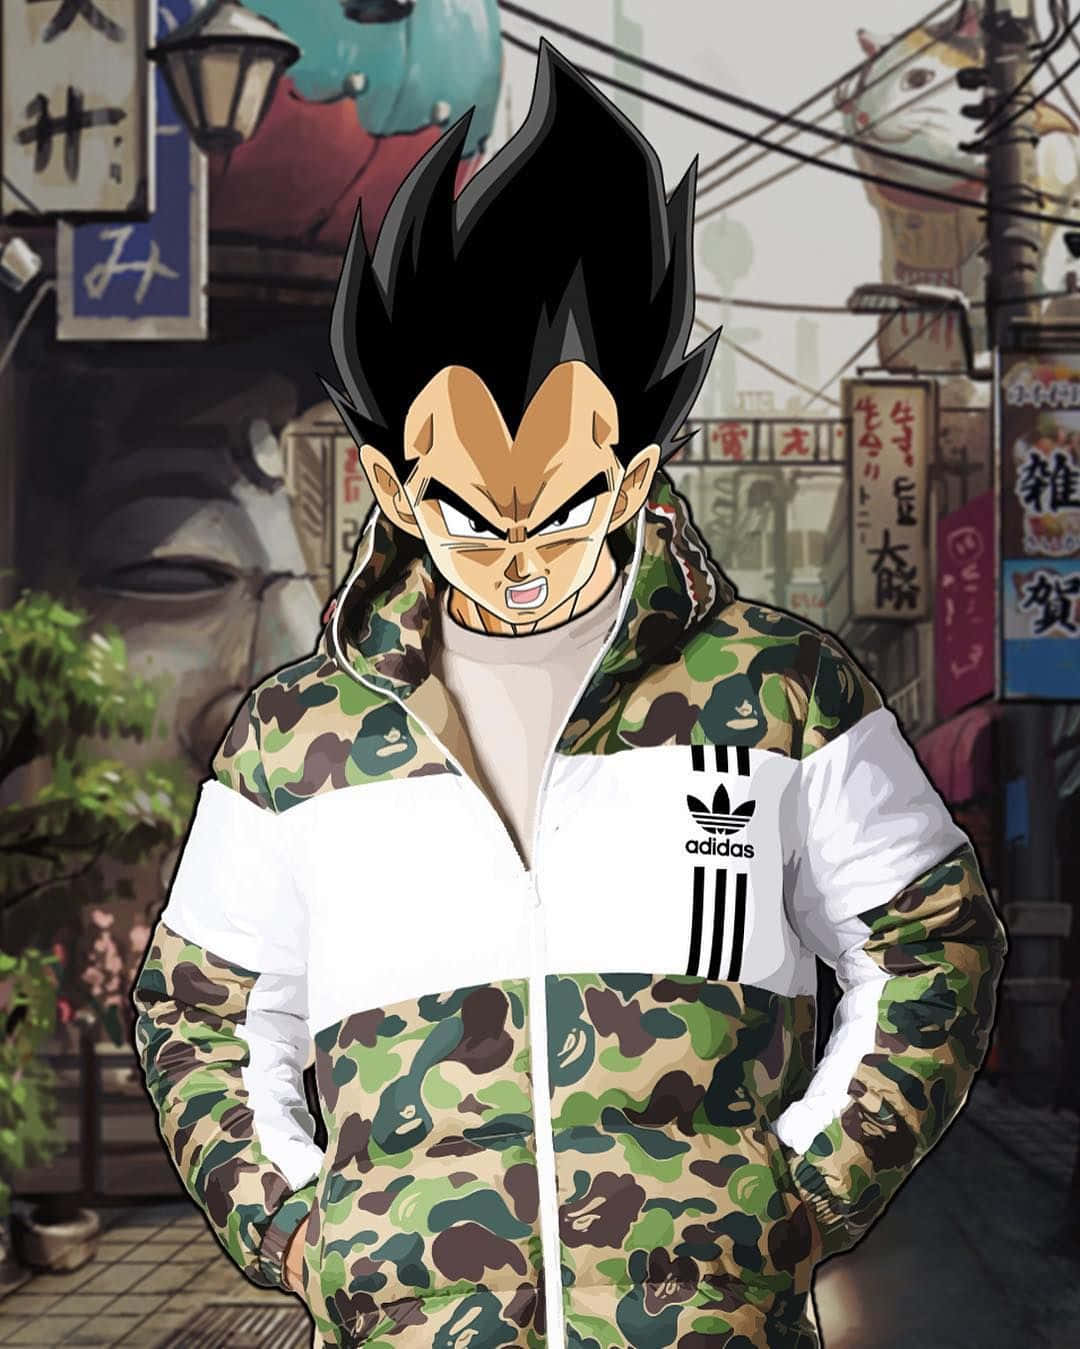 The Super Saiyan Prince Vegeta brings strength and determination to his fight. Wallpaper